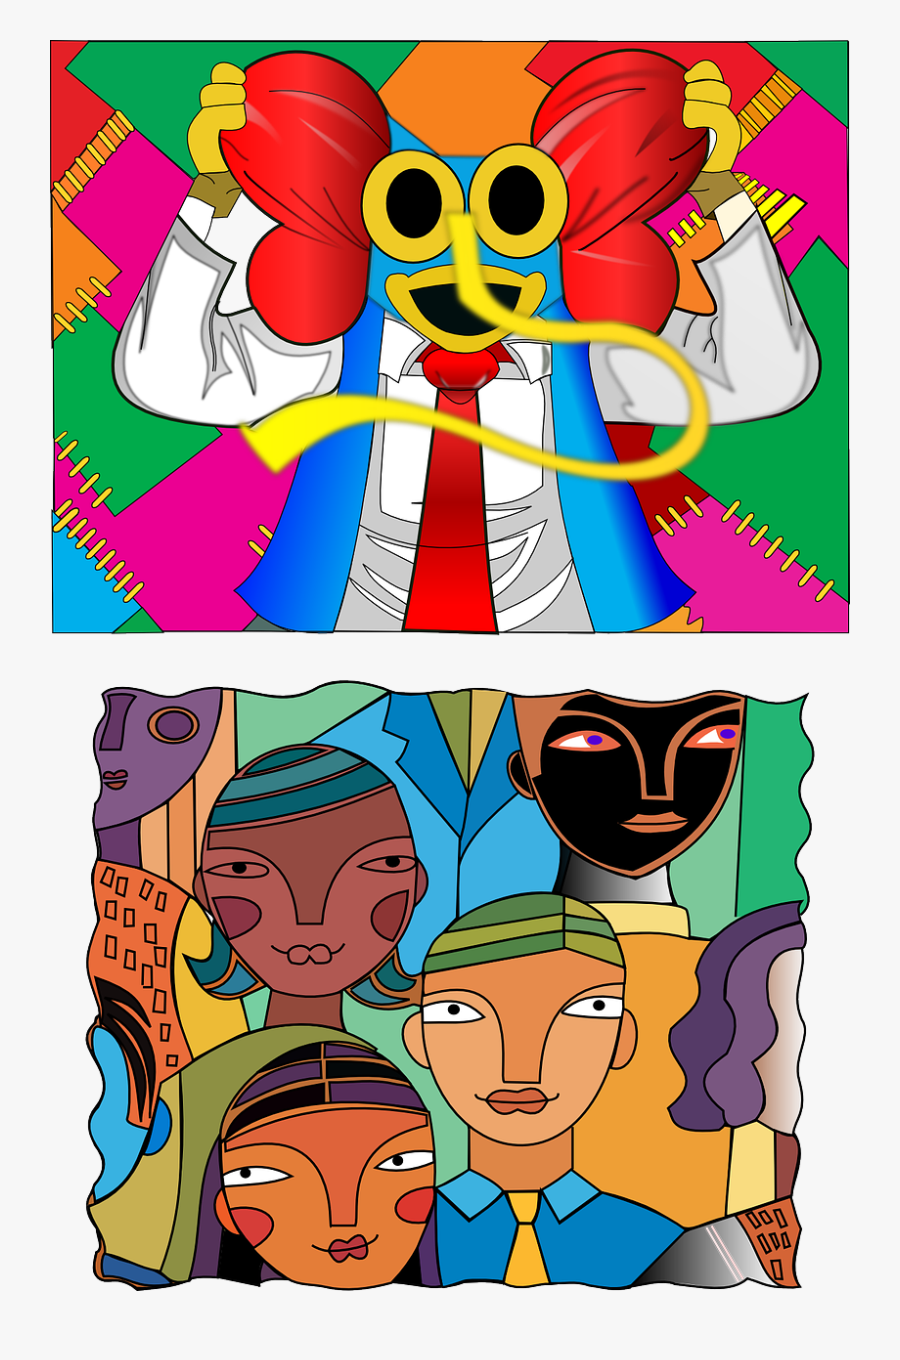 Carnival, Clown, People, Faces, Hat, Mask, Party, Fun - Carnival, Transparent Clipart